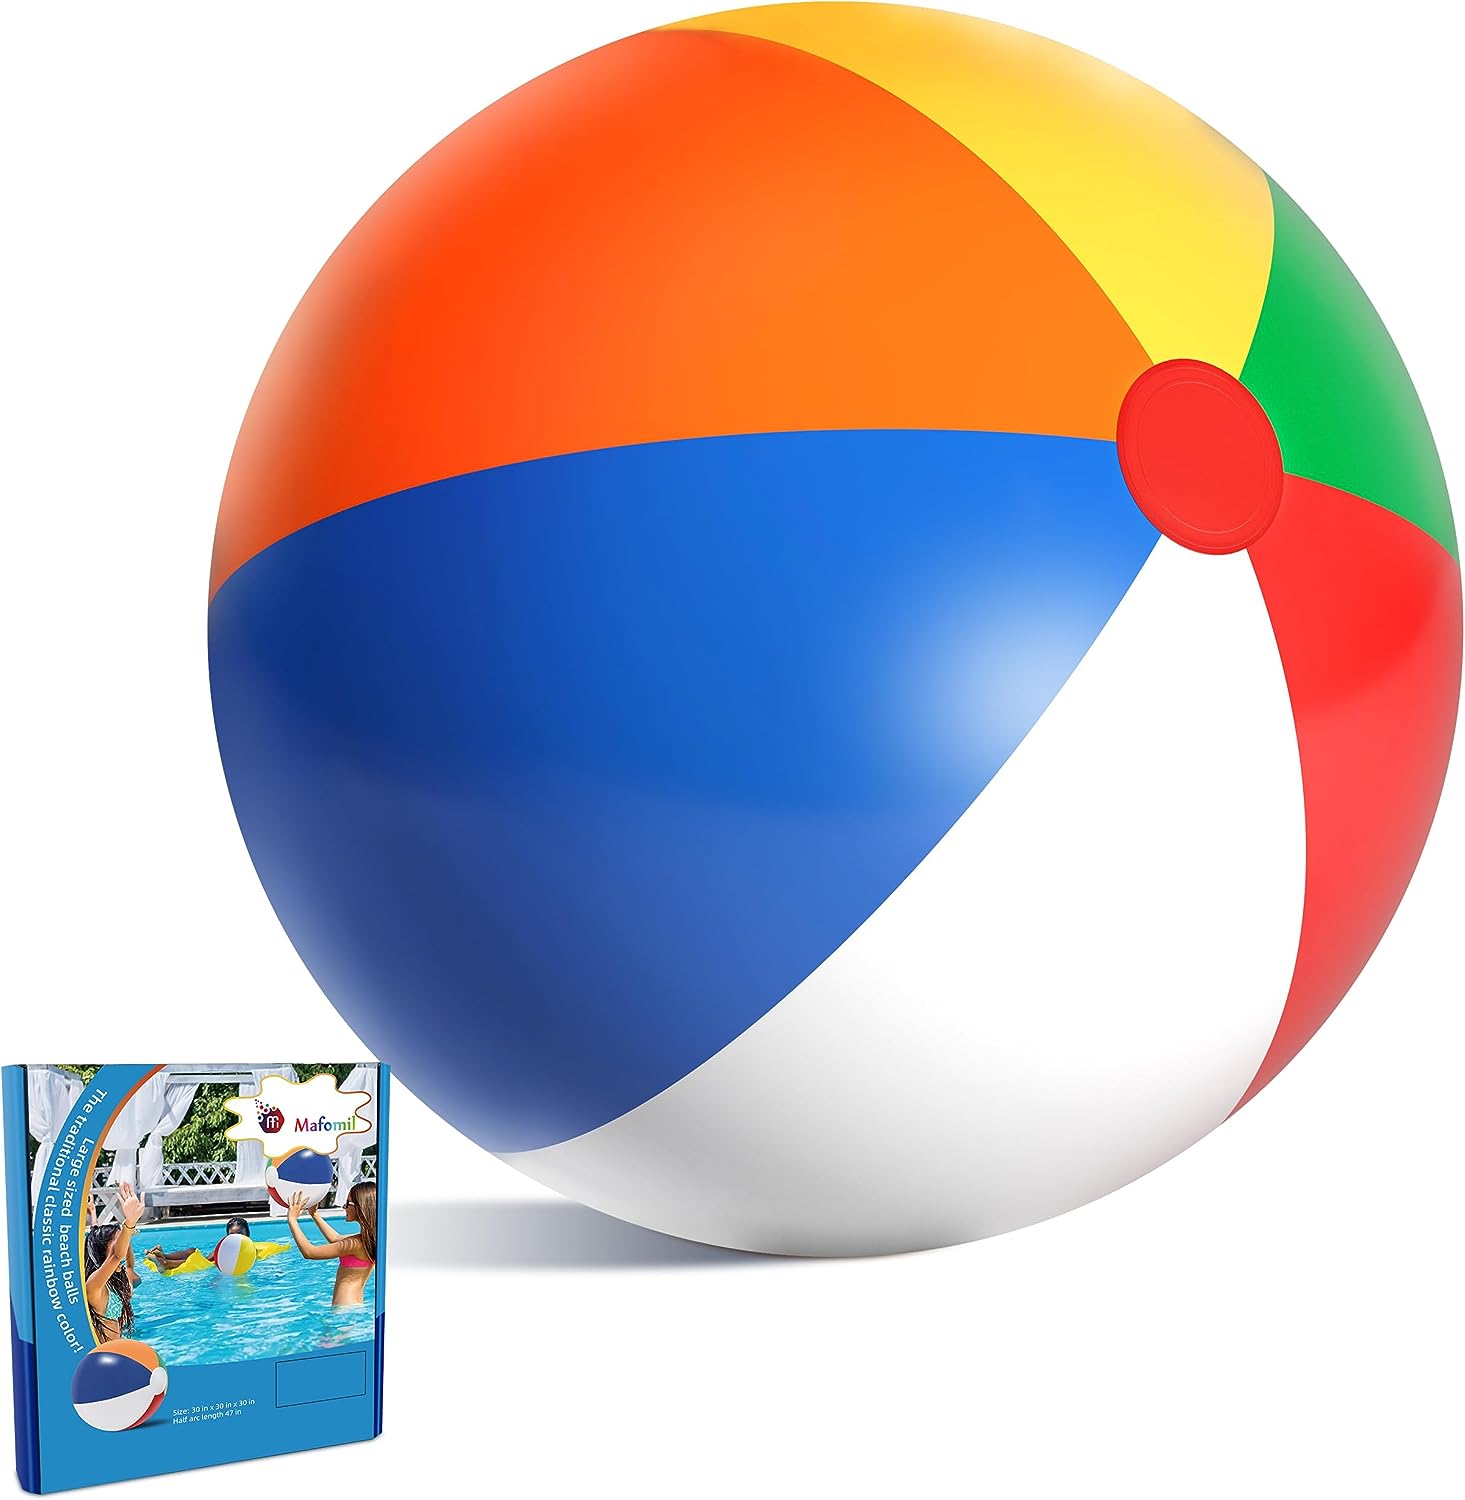 Gifts for the beach enthusiasts of Sun, Sand, and Surf with the Inflatable Beach Ball